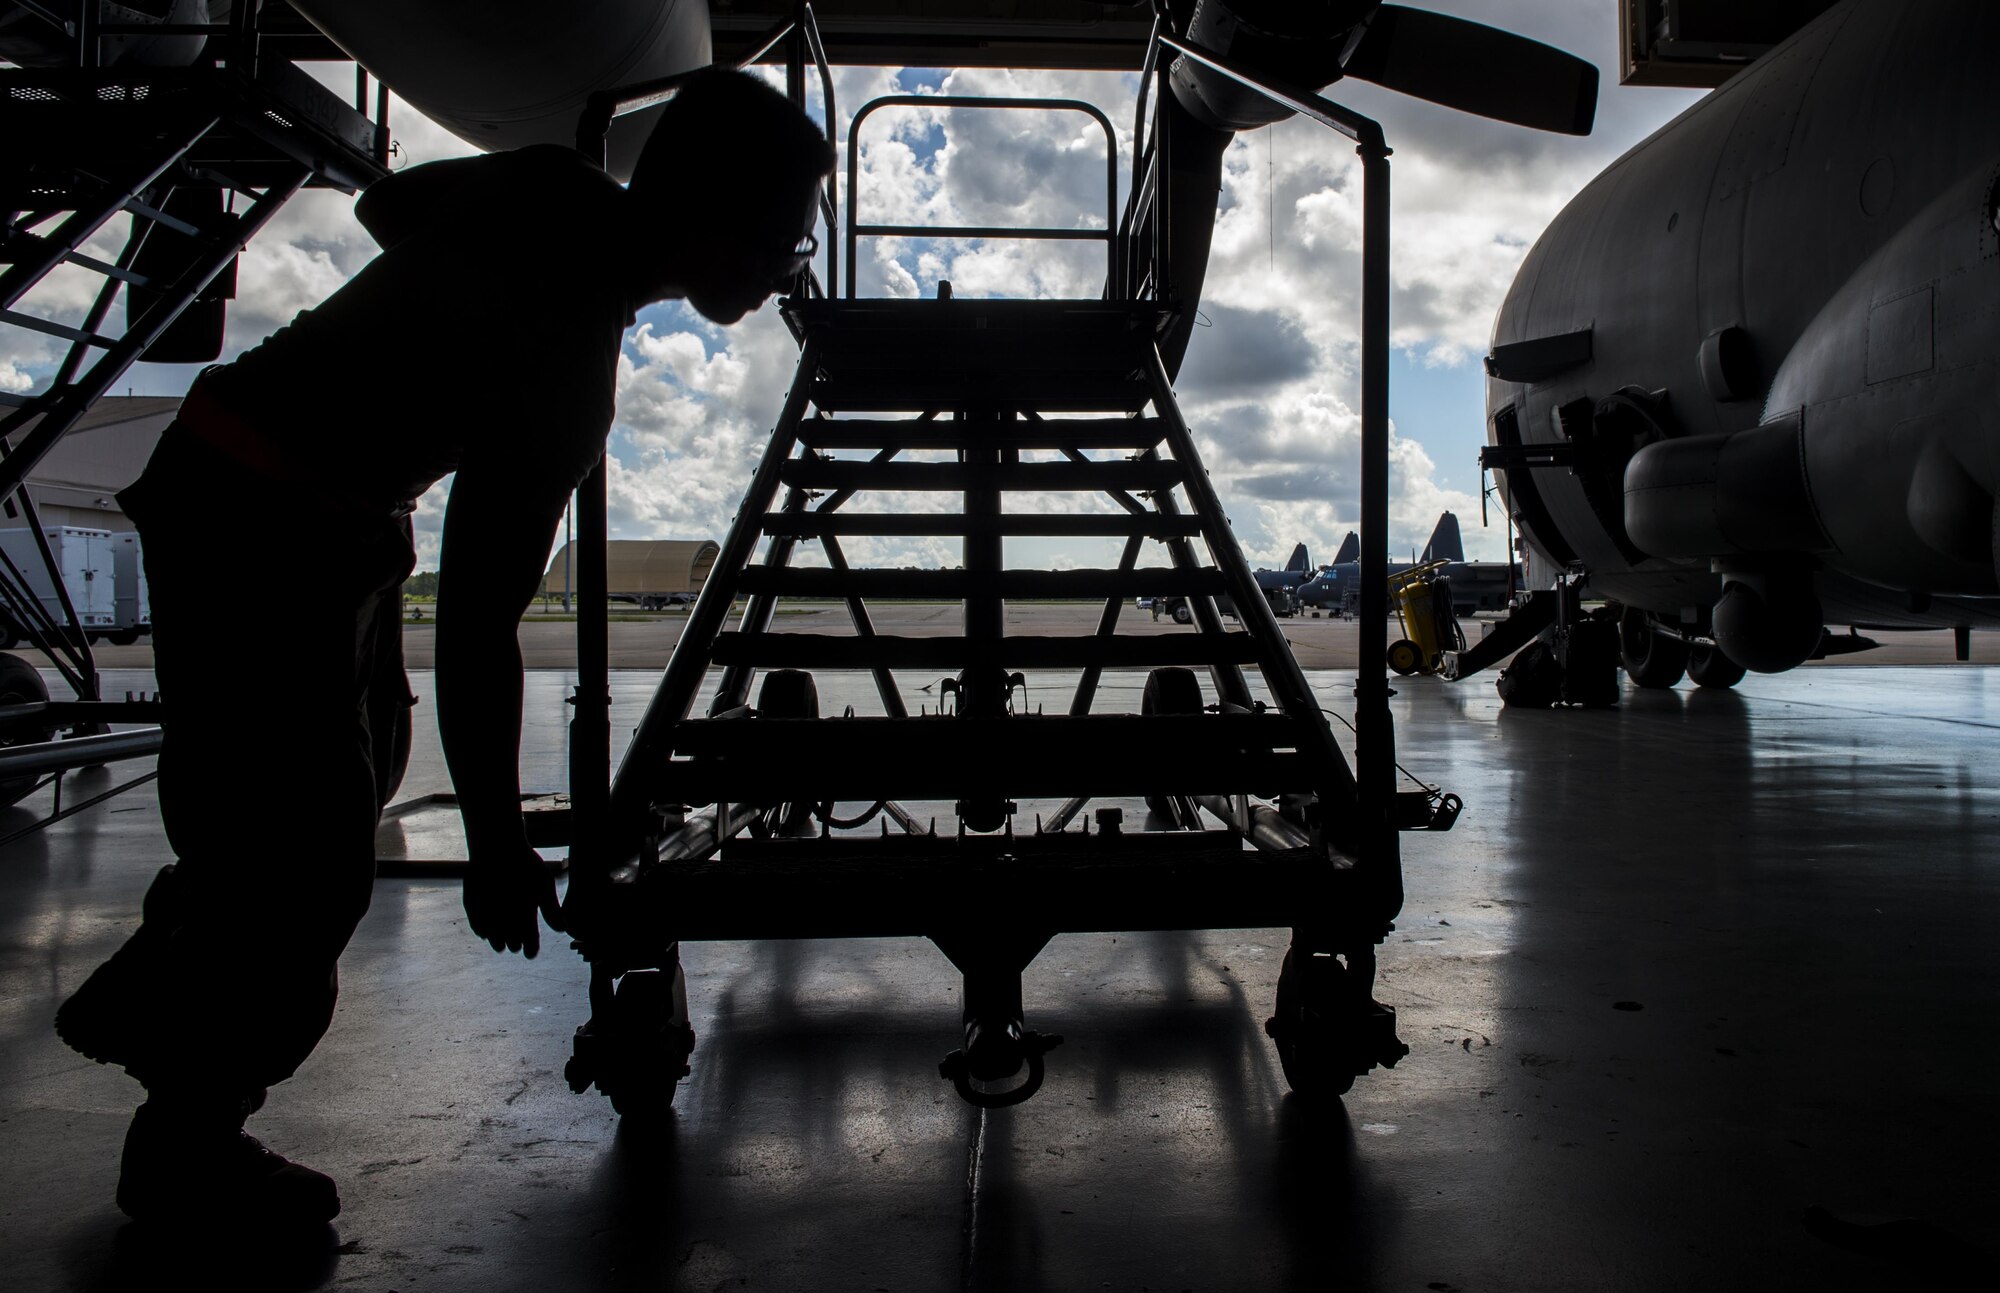 Airman 1st Class James Gaona, an aerospace propulsion journeyman with the 1st Special Operations Aircraft Maintenance Squadron, prepares a stand before conducting maintenance on an AC-130U Spooky gunship at Hurlburt Field, Fla., July 6, 2017. Aerospace propulsion technicians test, maintain and repair AC-130U engines, preparing them to execute the mission any time, any place. (U.S. Air Force photo by Airman 1st Class Joseph Pick)